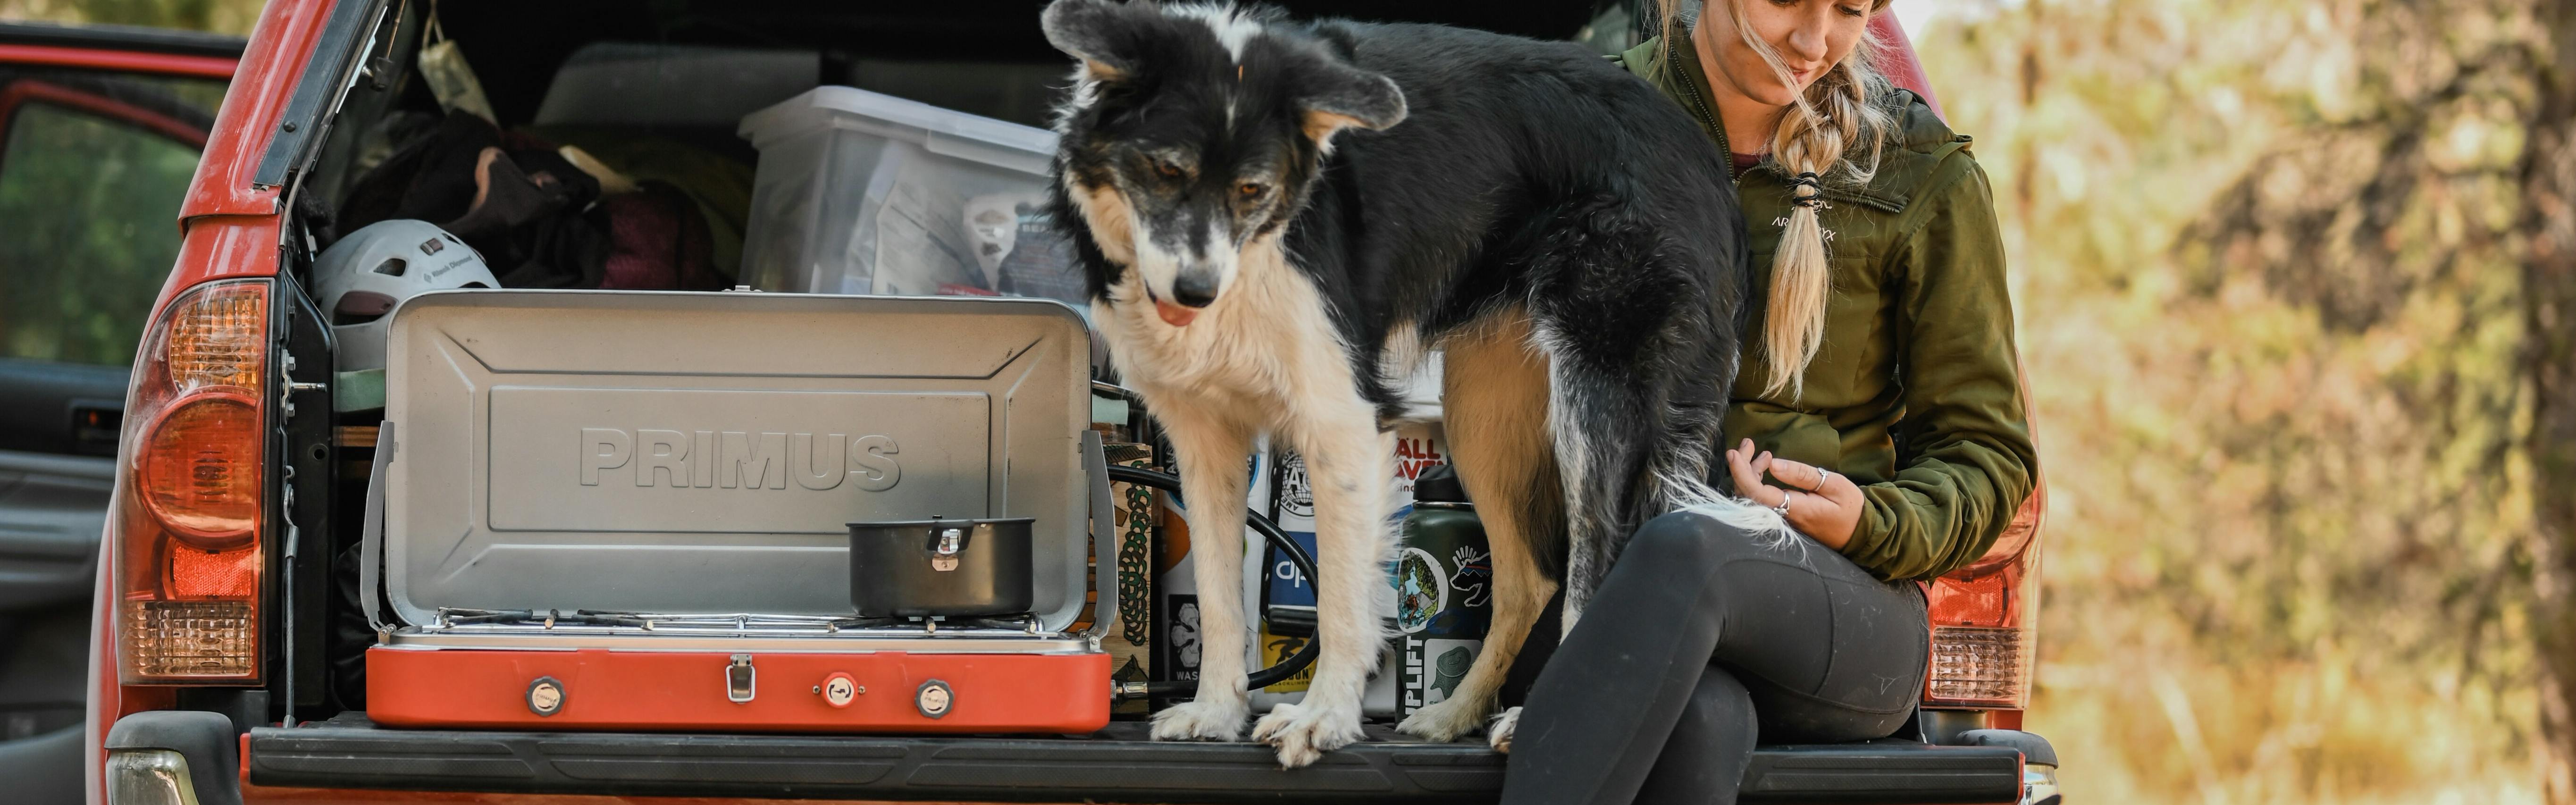 A stove, a dog, and a woman all sit on the tailgate of a truck. There is a pot on the stove.